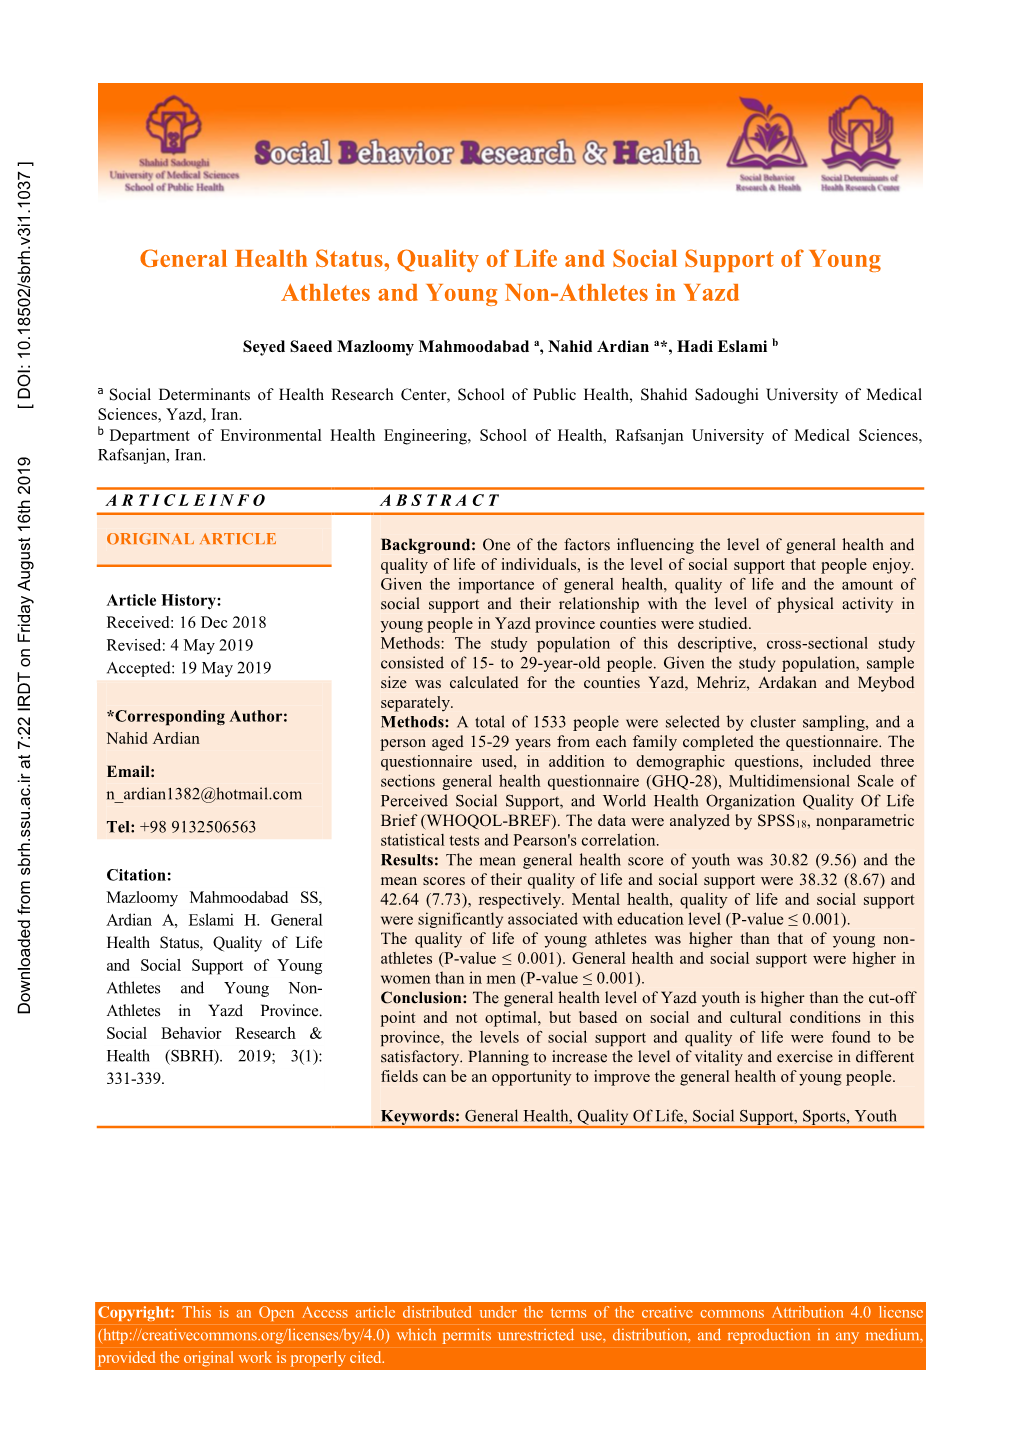 General Health Status, Quality of Life and Social Support of Young Athletes and Young Non-Athletes in Yazd